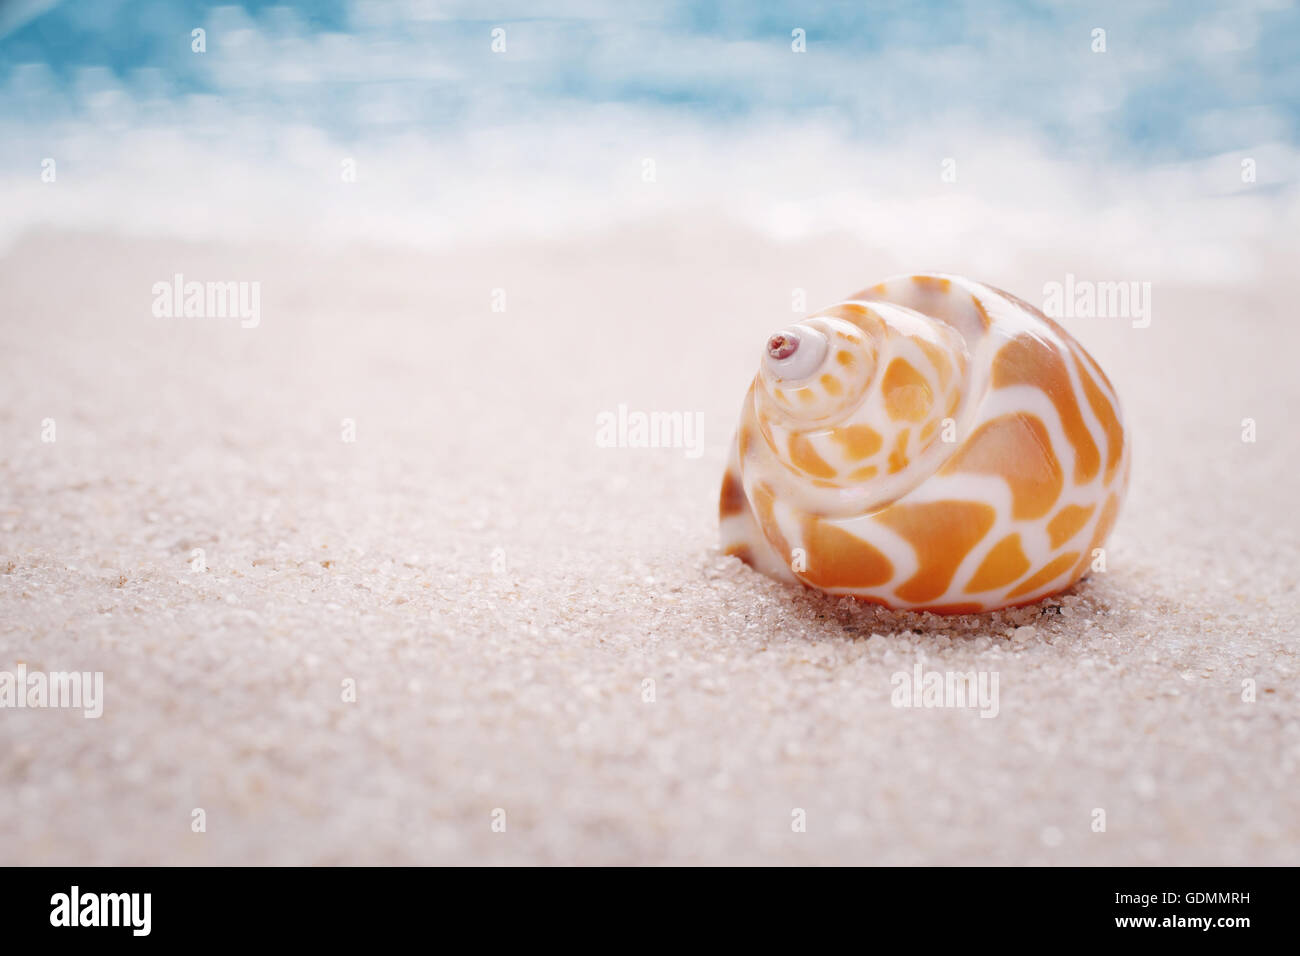 Sea shell on sandy beach Banque D'Images